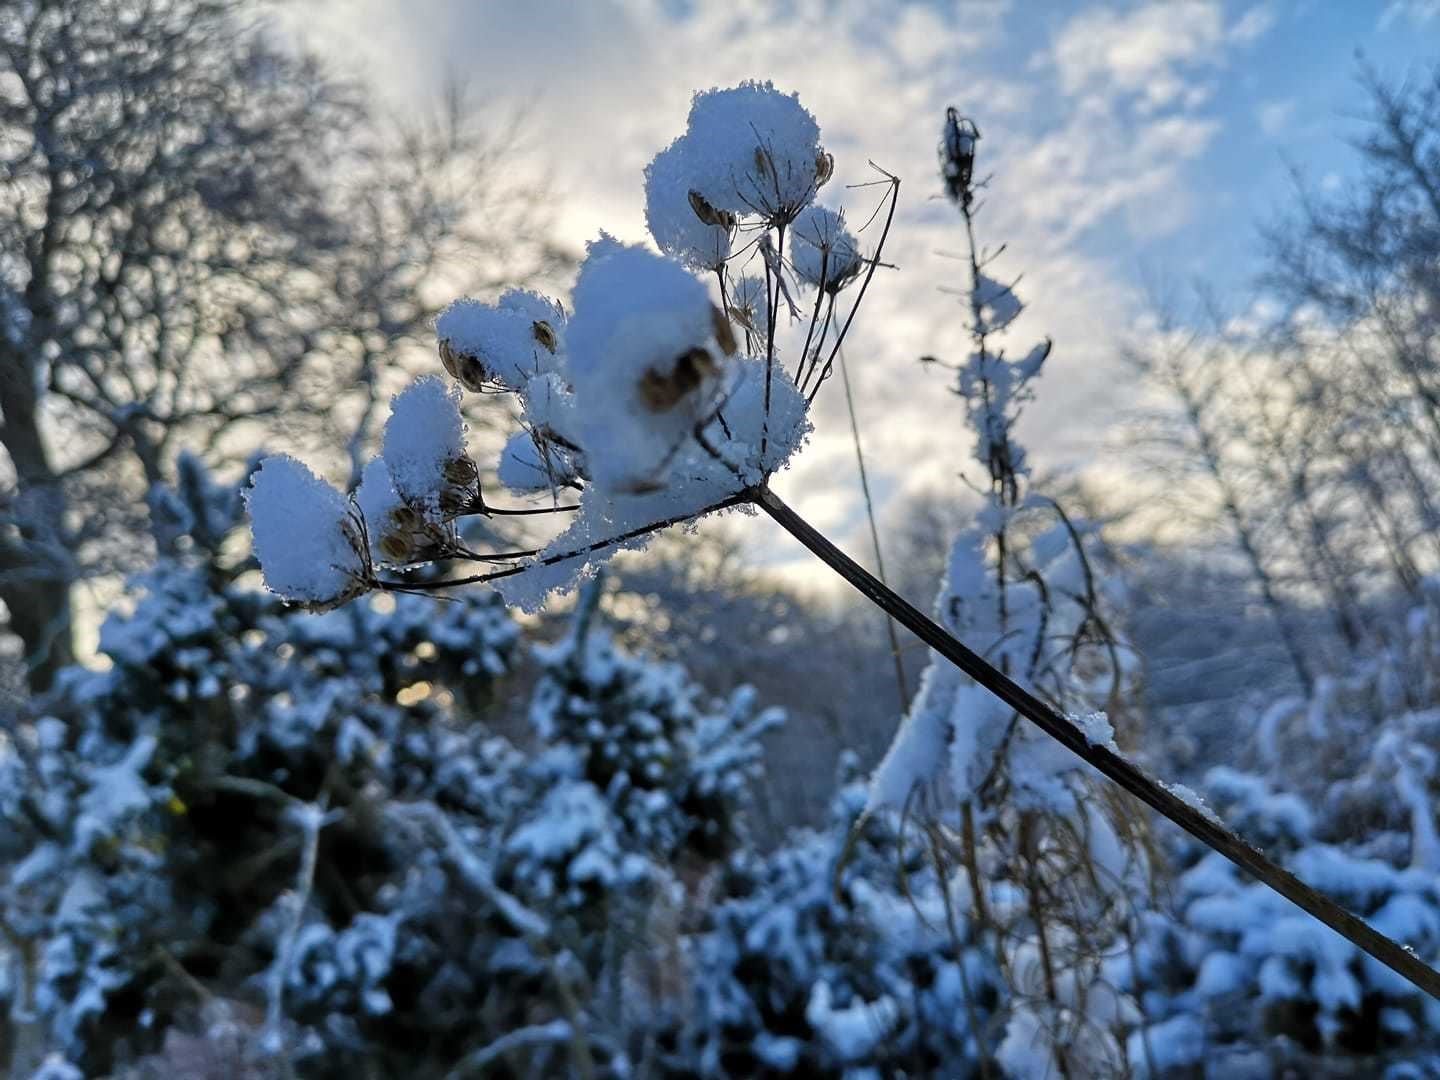 Lynn Alsamarraie sent this picture of a flower in the snow.